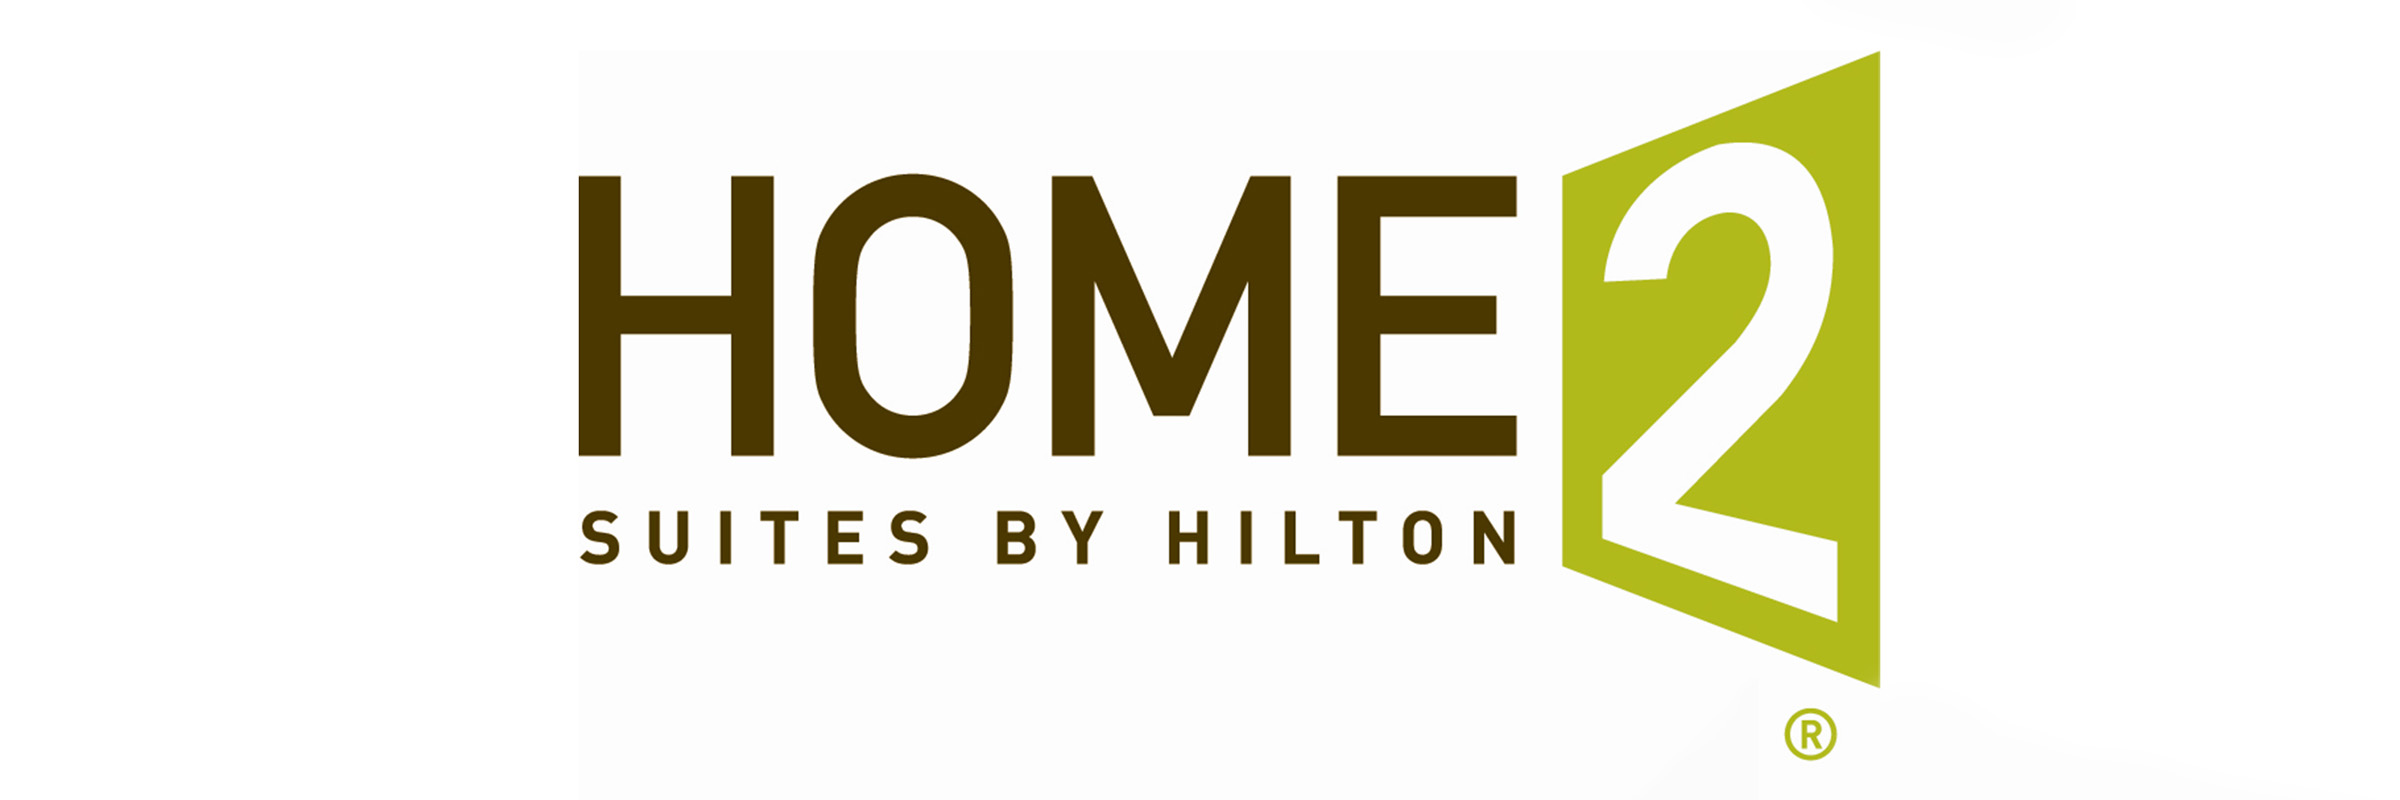 logo-home2.png